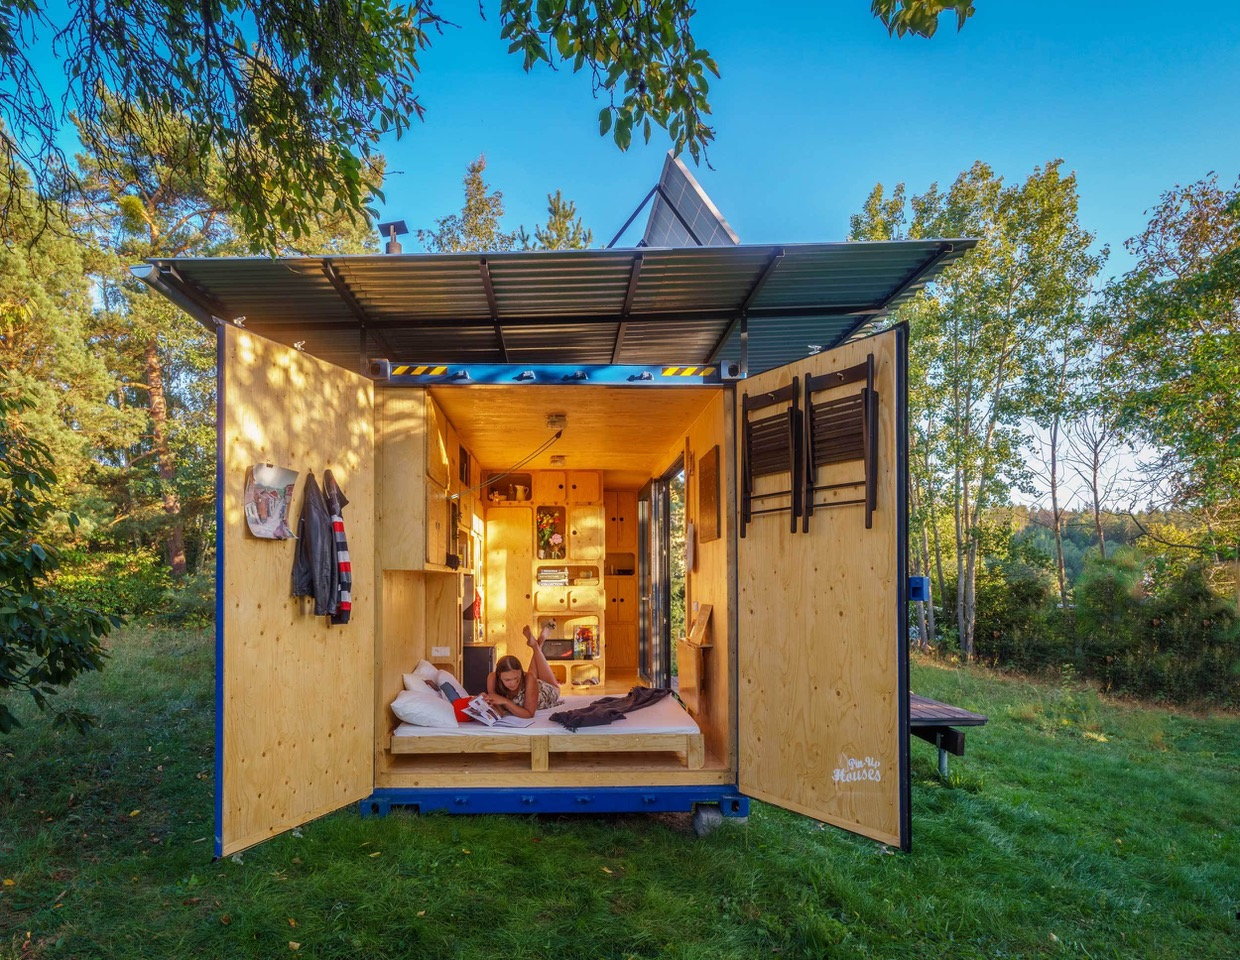 The Gaia Off-Grid Container House Costs Just $21,000 to Build